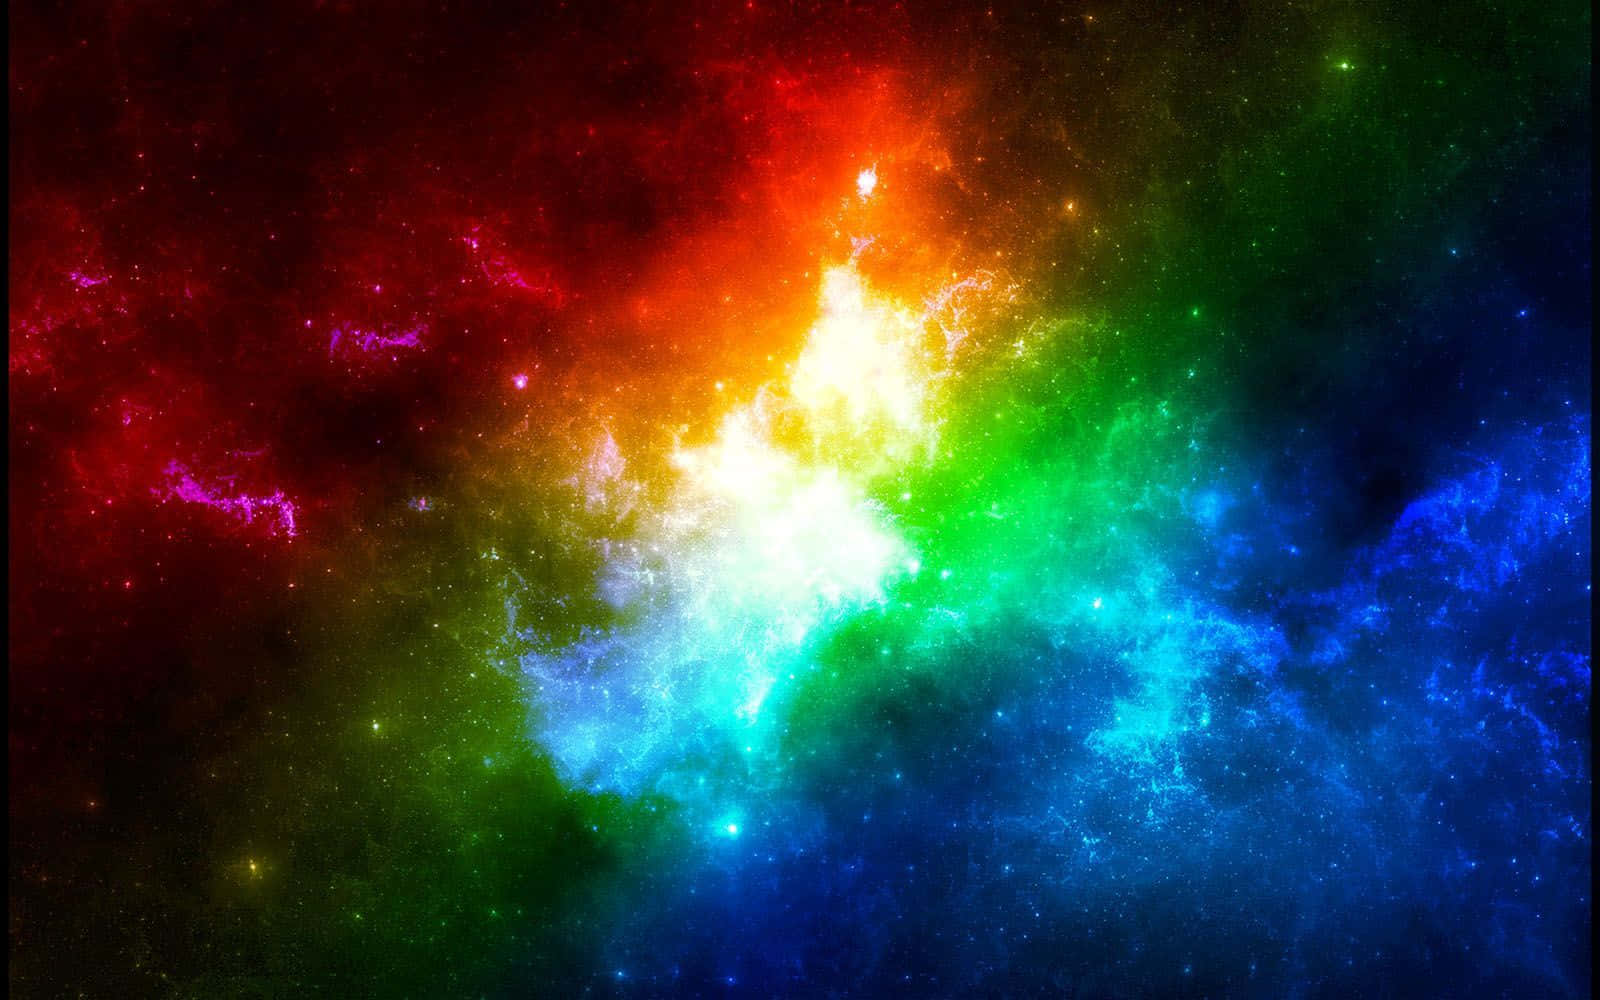 Colorful Space - A mesmerizing galaxy of colors Wallpaper